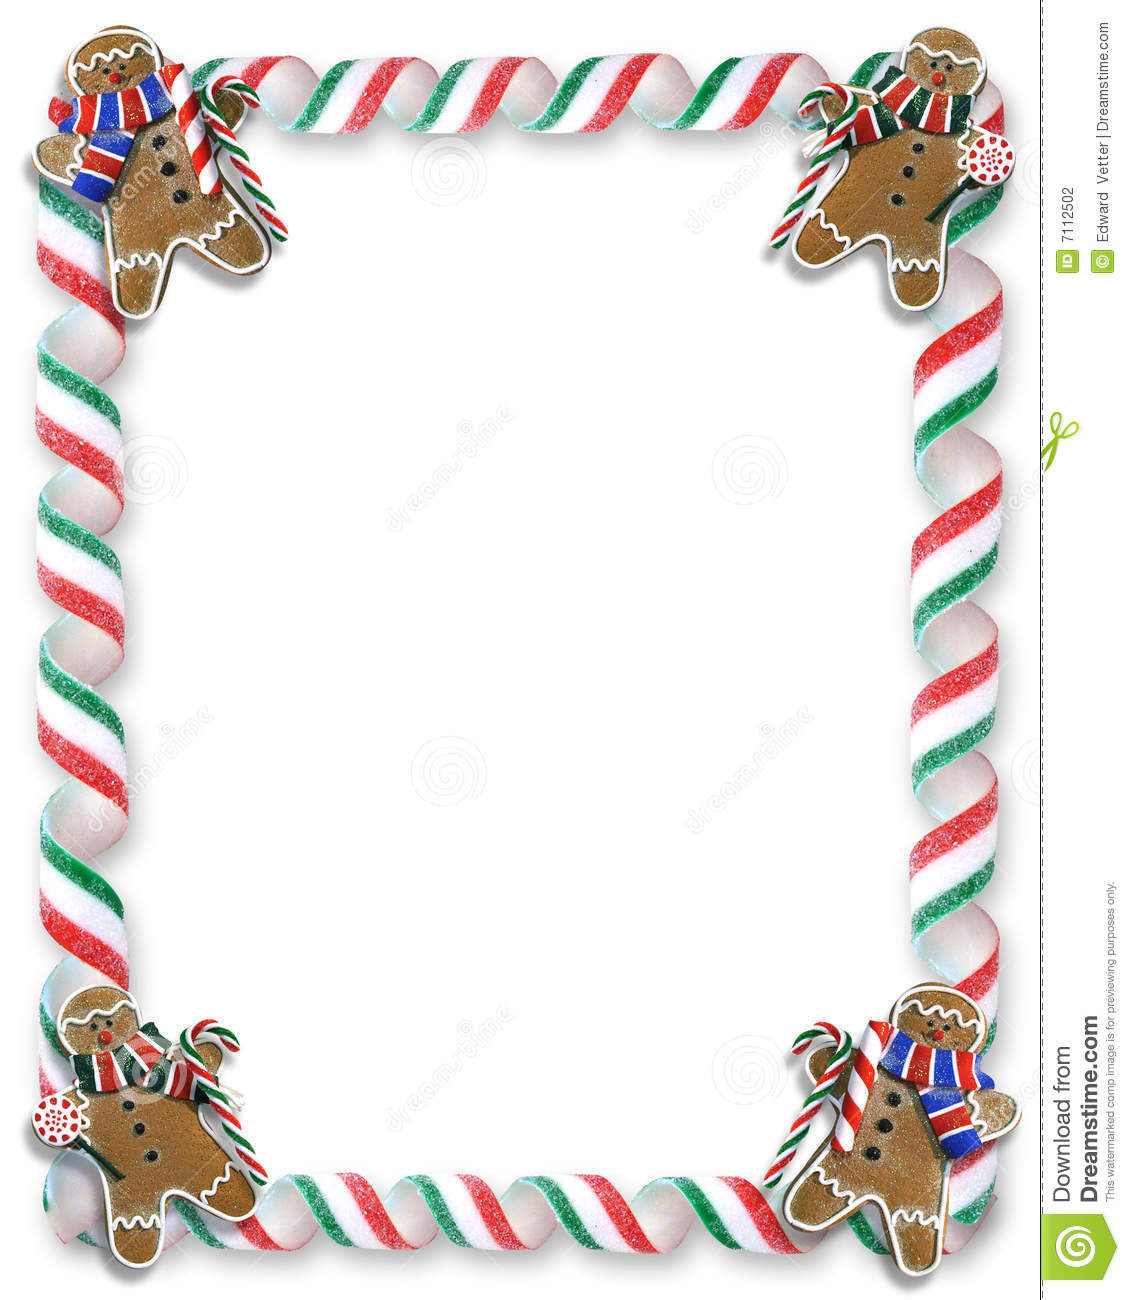 Christmas Candy Border
 Christmas Border Cookies And Candy Stock Illustration